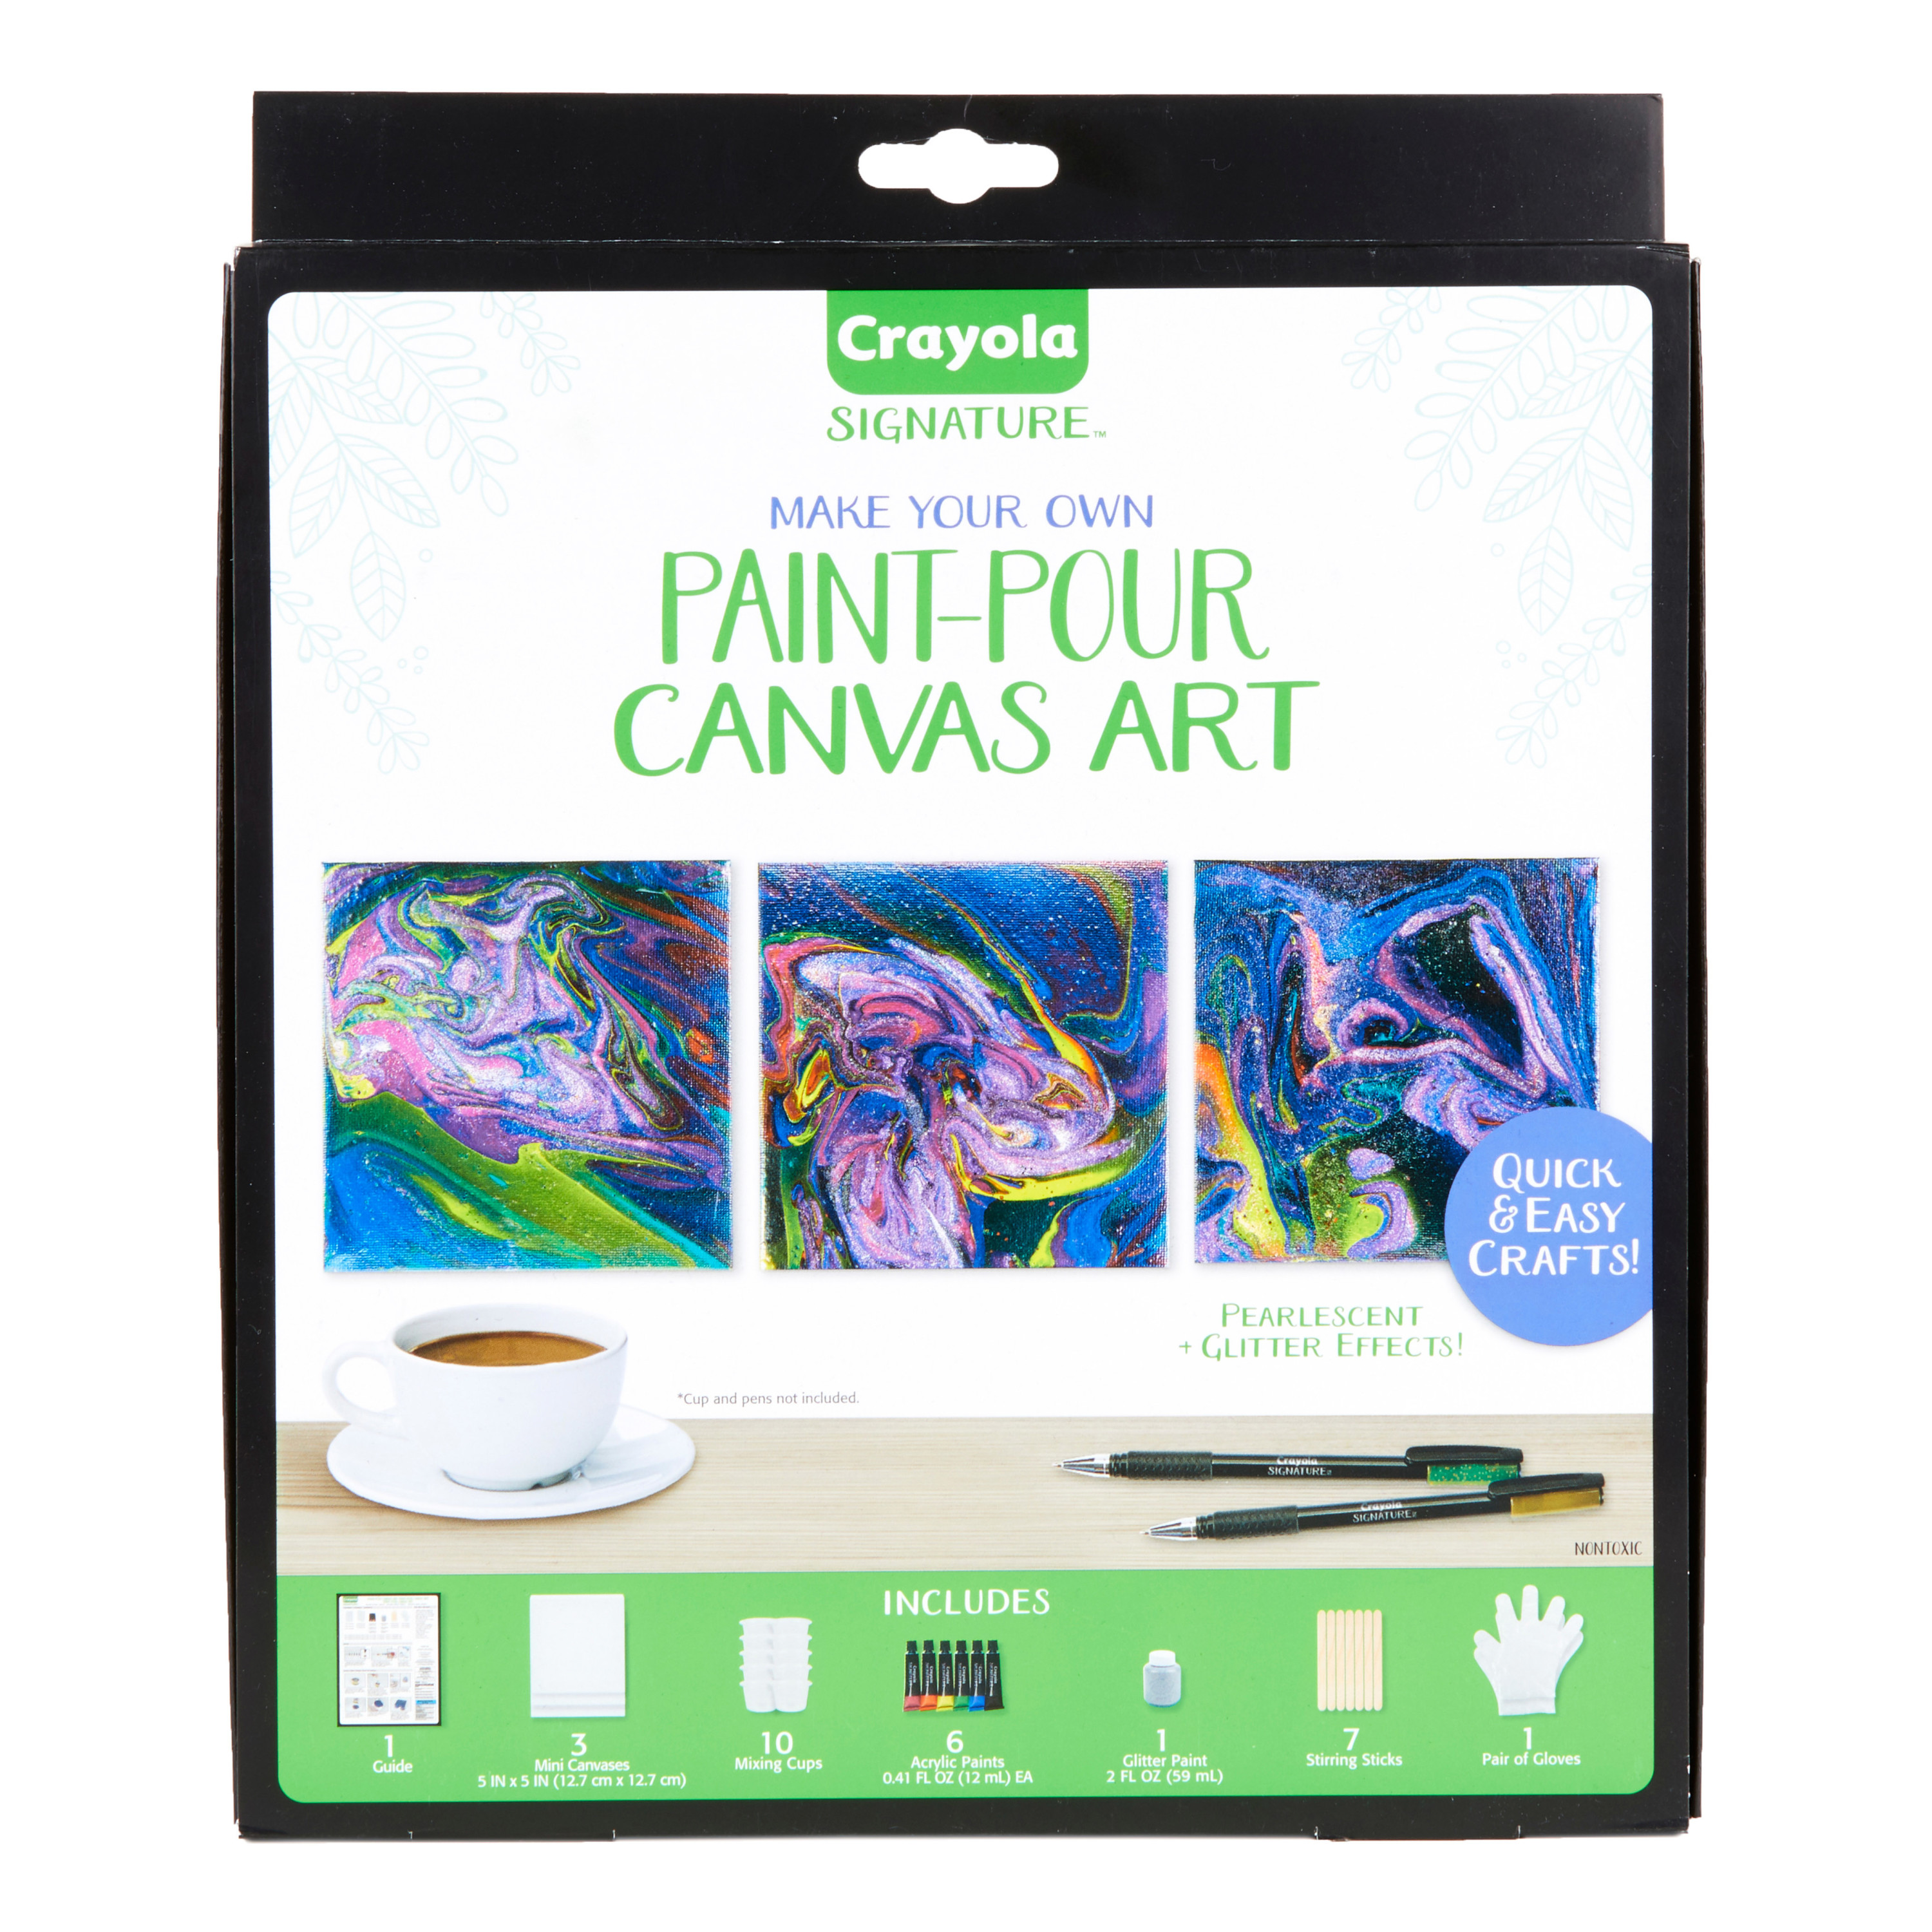 Crayola Mini Canvas Painting Kit, DIY Gifts for Crafters, Arts & Crafts for Teens, 14pcs, Adult - image 1 of 13